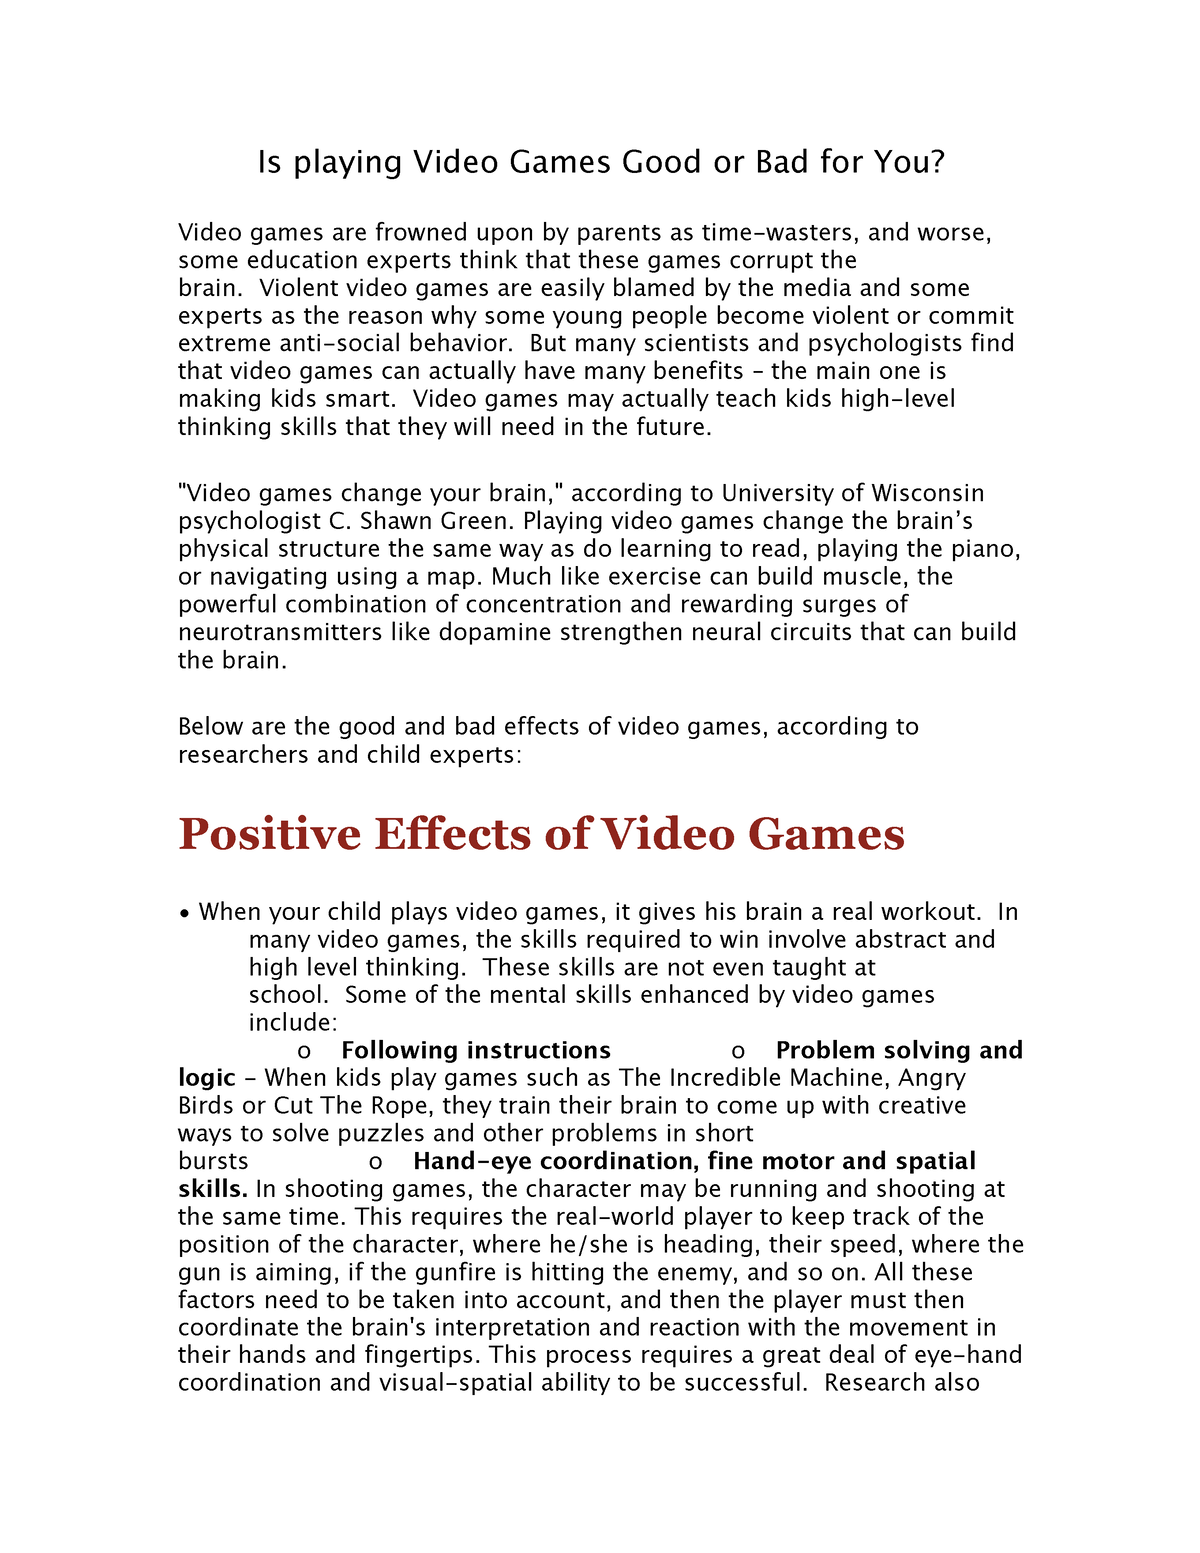 are video games good or bad for you essay